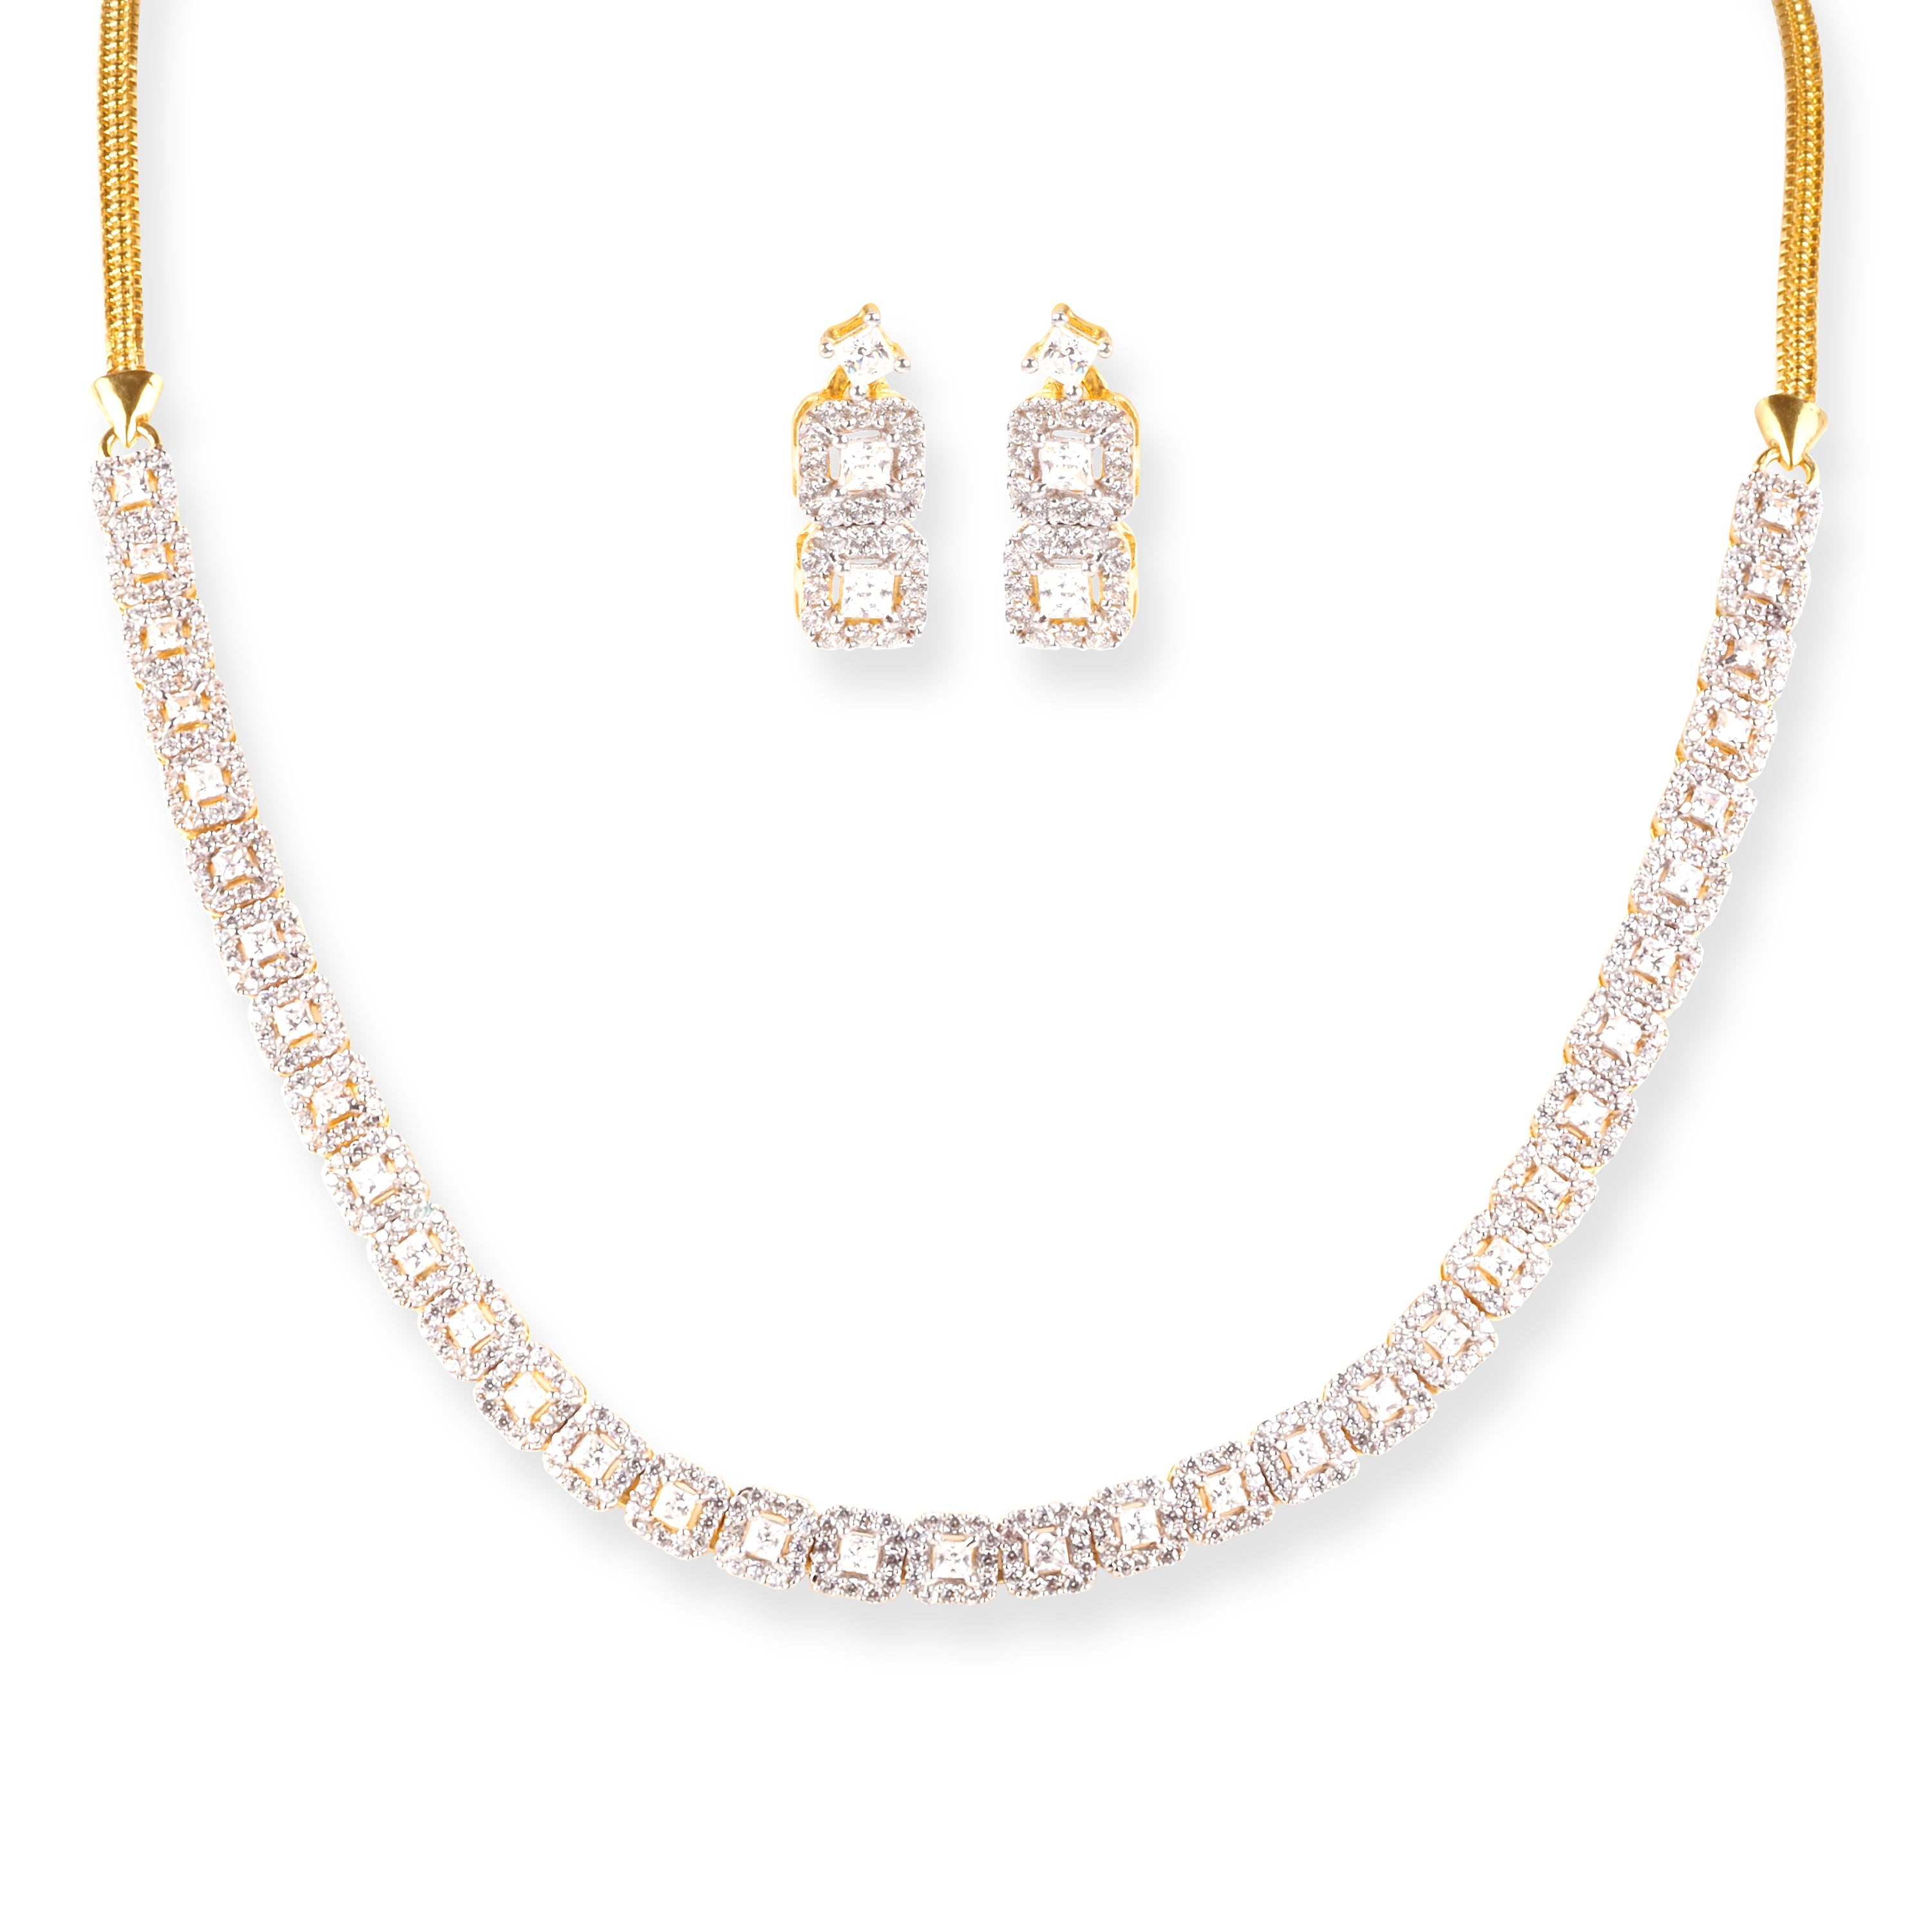 22ct Gold Necklace and Earrings Set with Cubic Zirconia Stones N-8623 E-8623